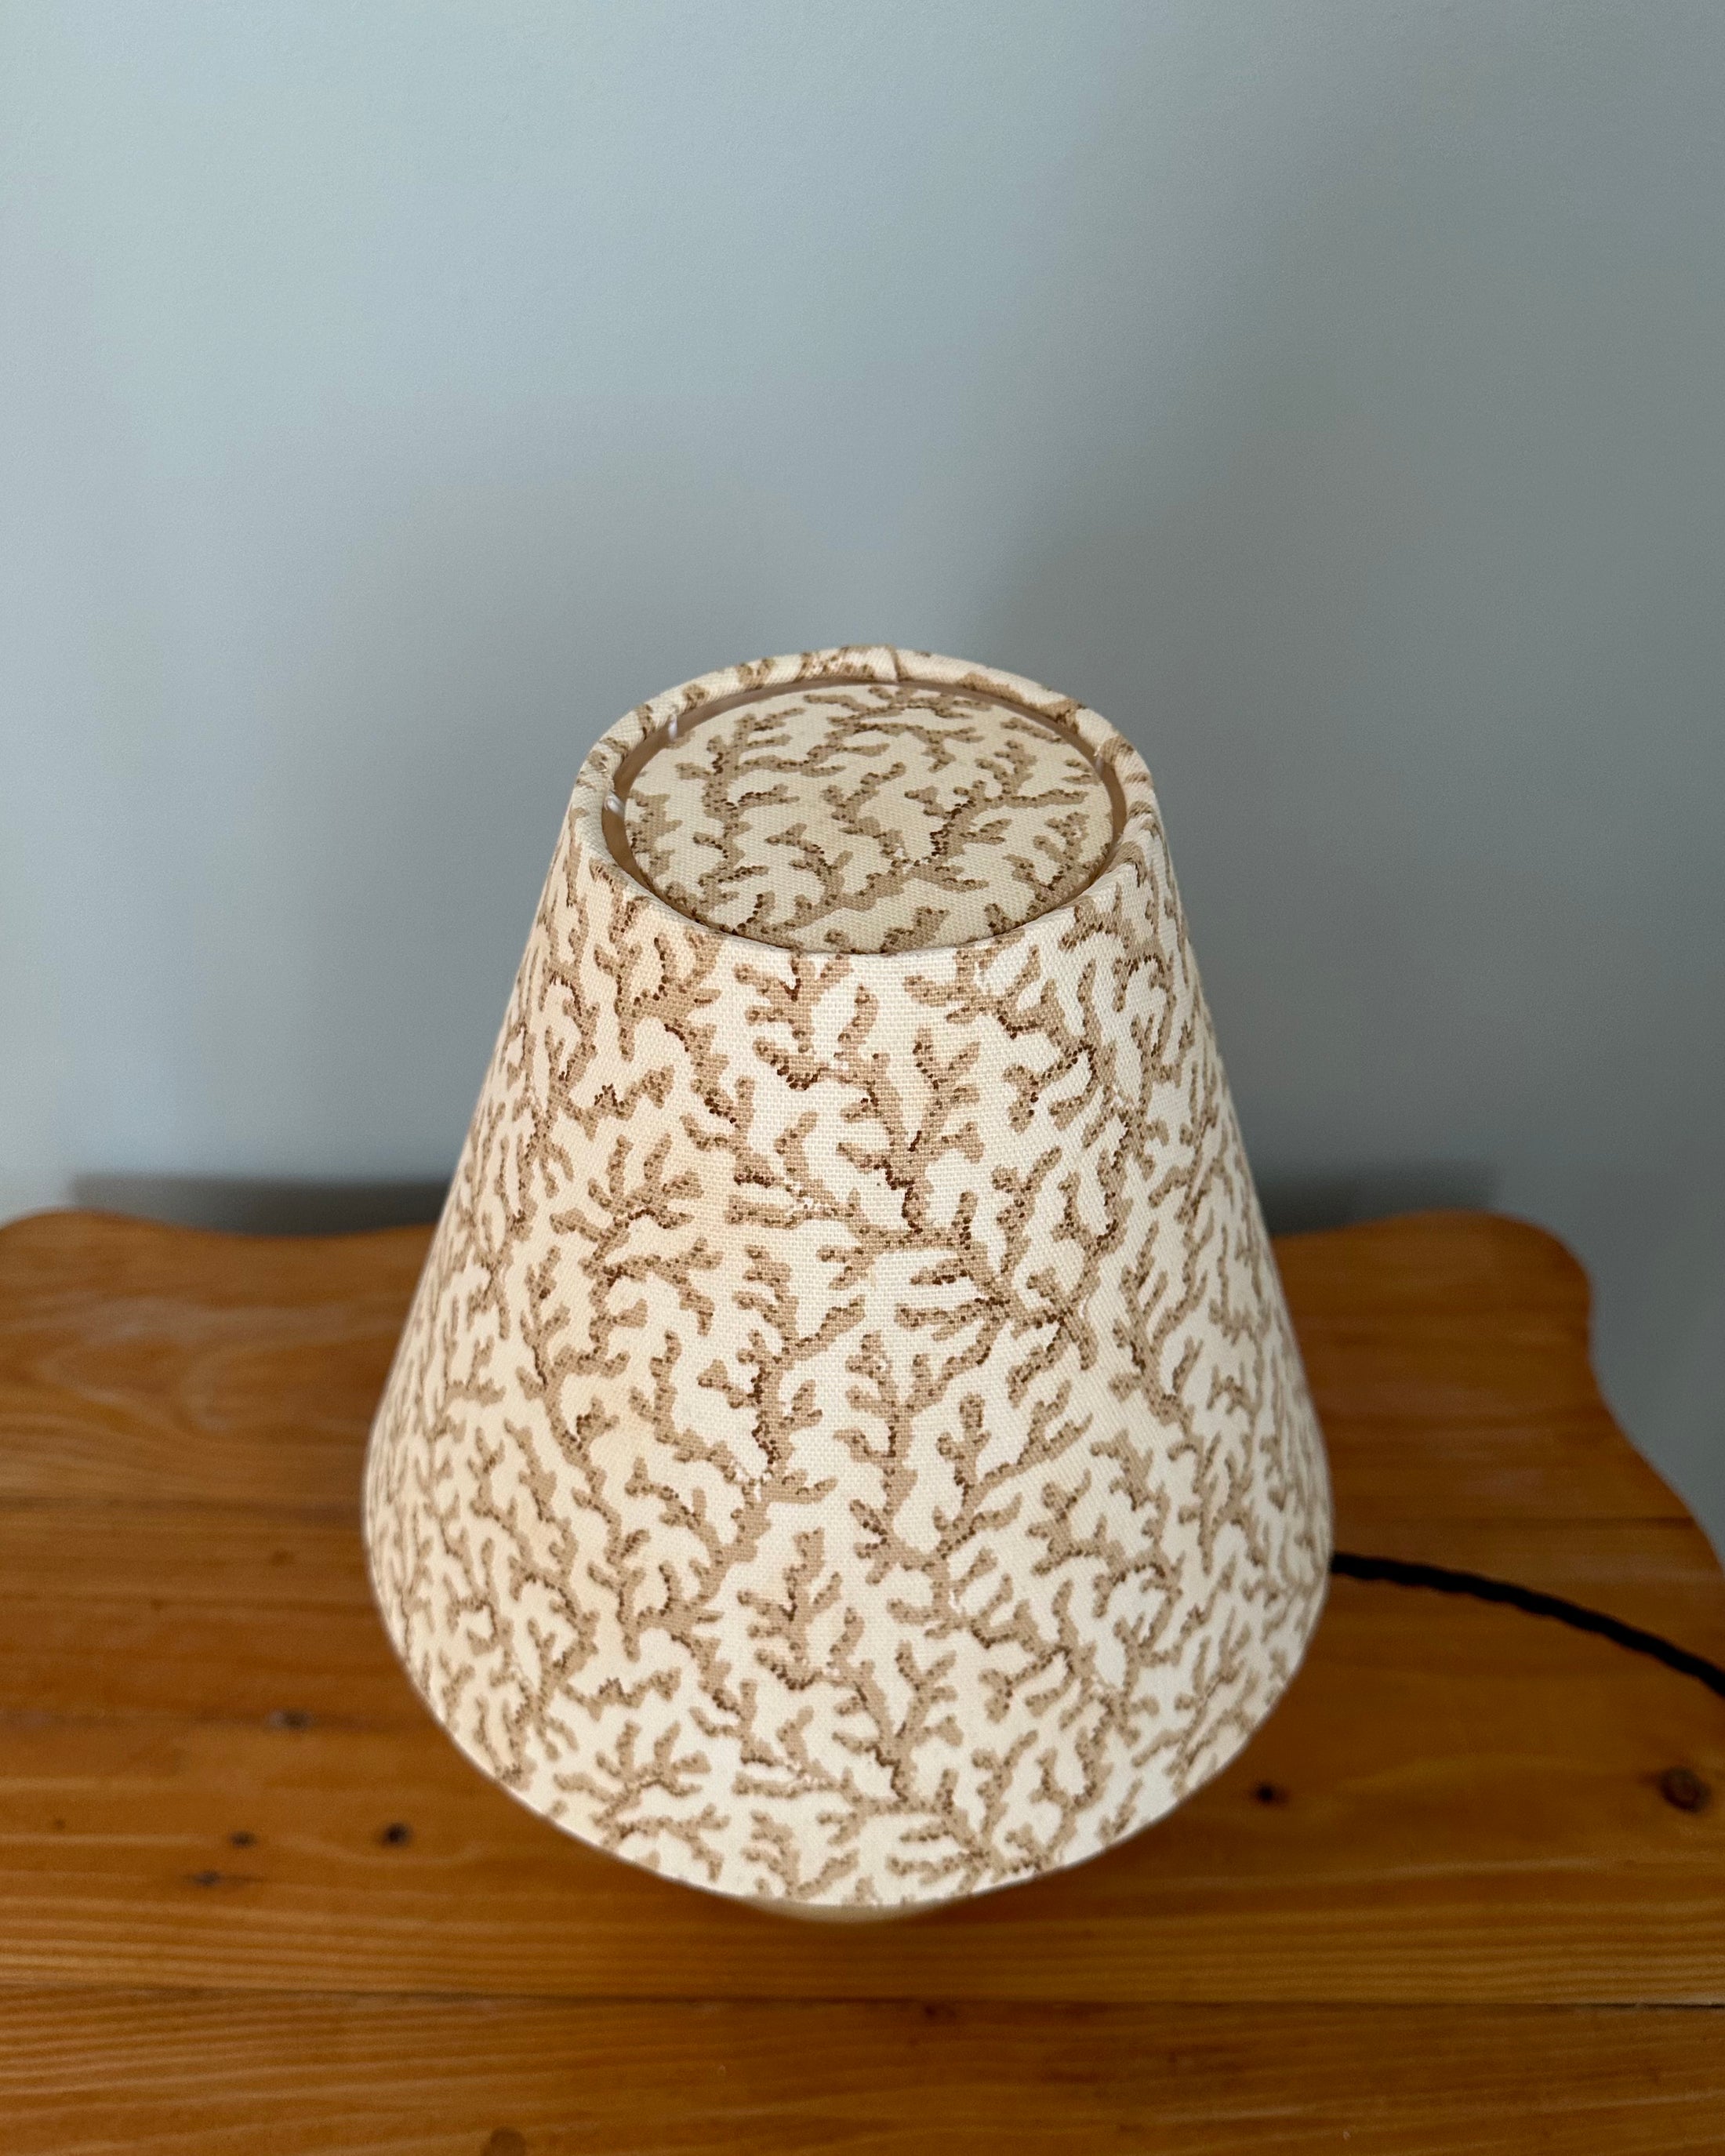 Vintage Rörstrand Table Lamp with Shade